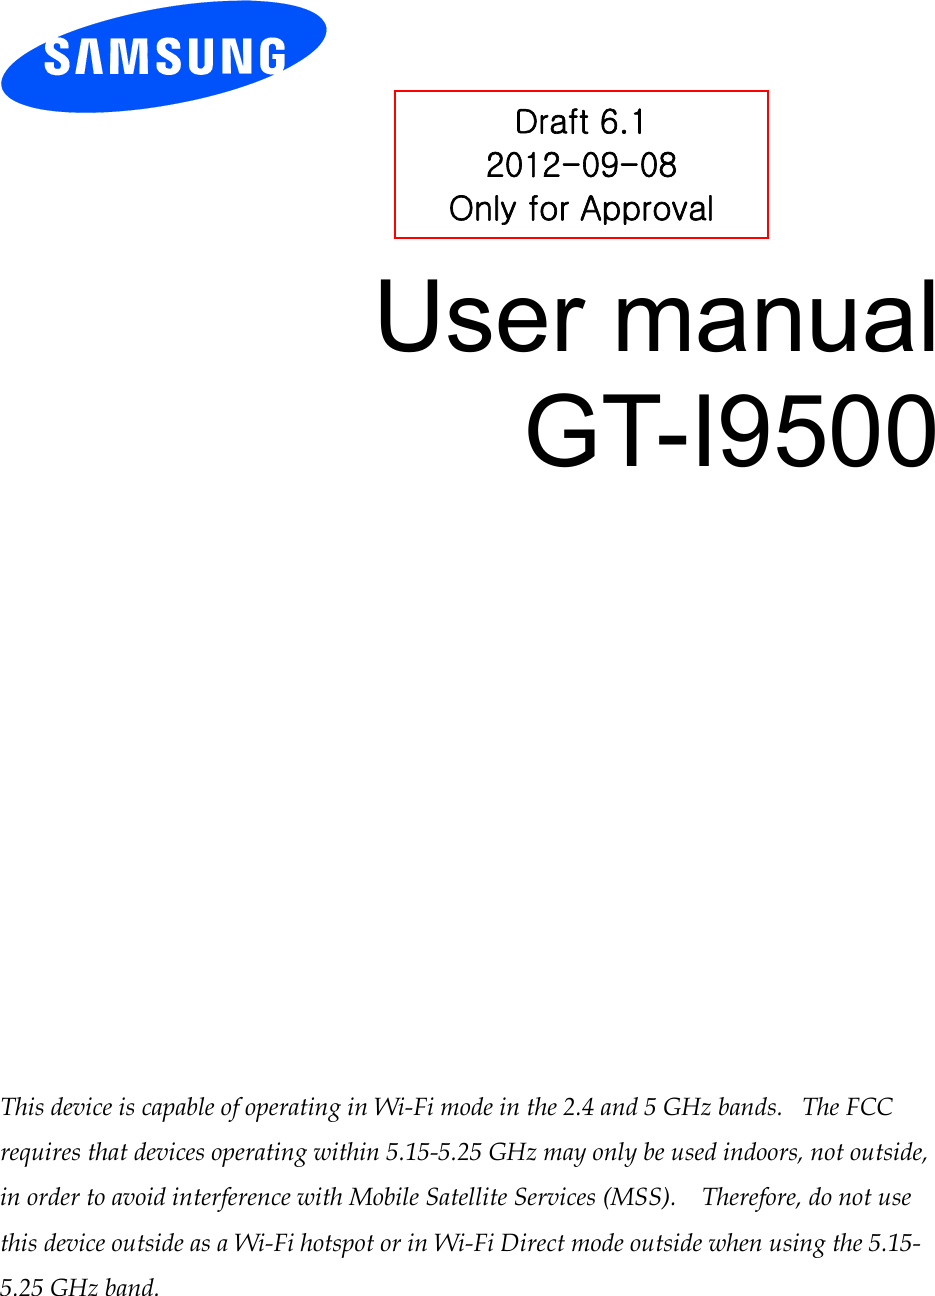          User manual GT-I9500                 This device is capable of operating in Wi-Fi mode in the 2.4 and 5 GHz bands.   The FCC requires that devices operating within 5.15-5.25 GHz may only be used indoors, not outside, in order to avoid interference with Mobile Satellite Services (MSS).    Therefore, do not use this device outside as a Wi-Fi hotspot or in Wi-Fi Direct mode outside when using the 5.15-5.25 GHz band.  Draft 6.1 2012-09-08 Only for Approval 